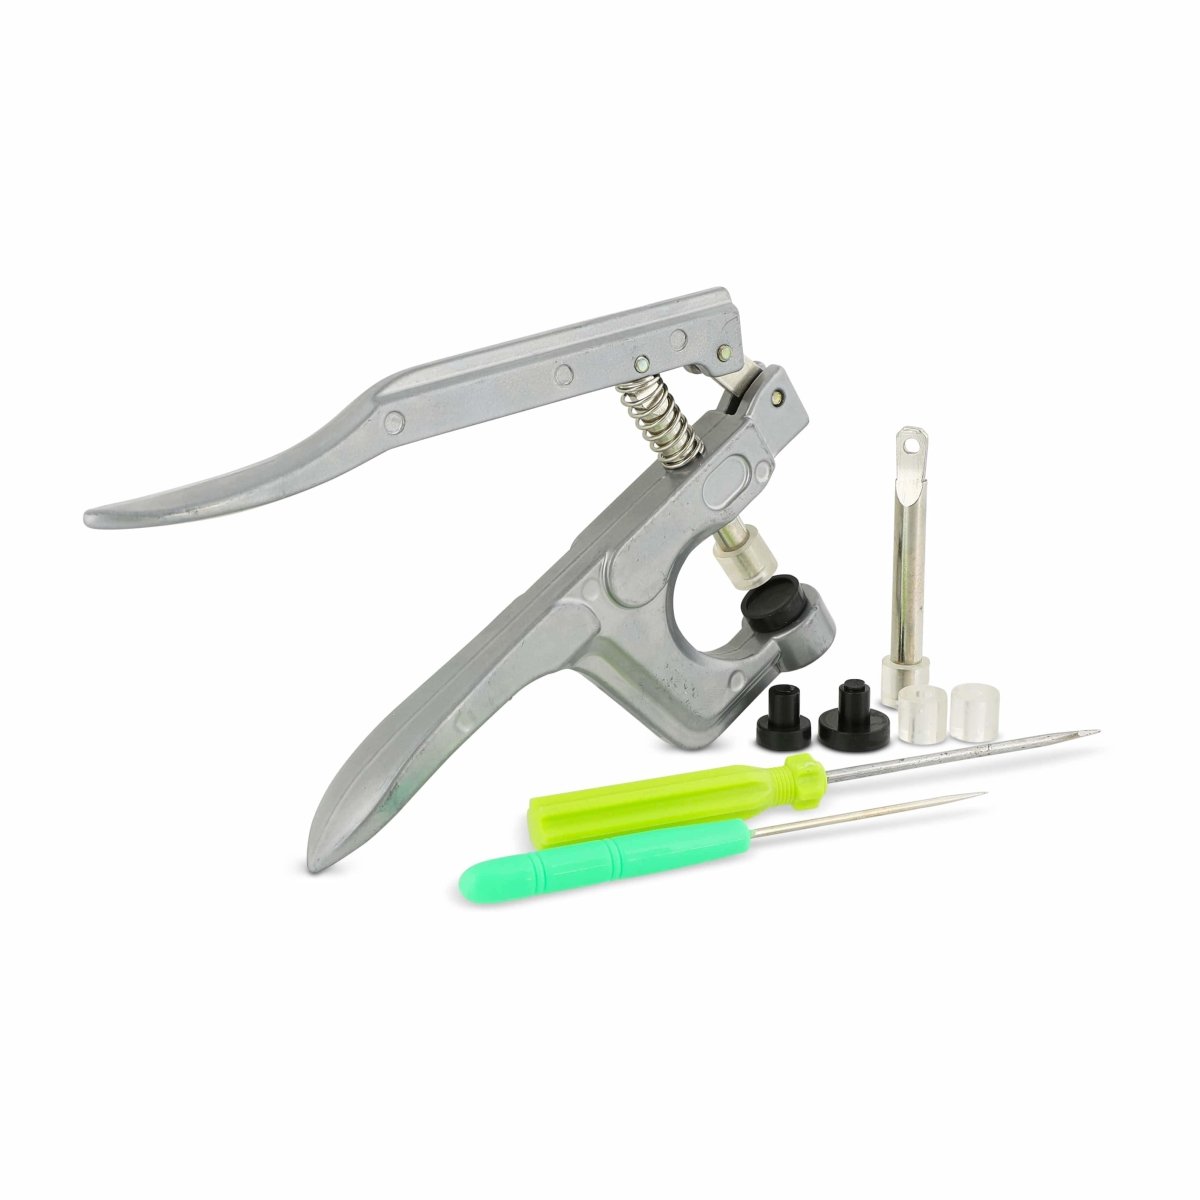 KAM Plastic Snap Pliers And Awl for Installing/Setting KAM Resin Snaps – I  Like Big Buttons!